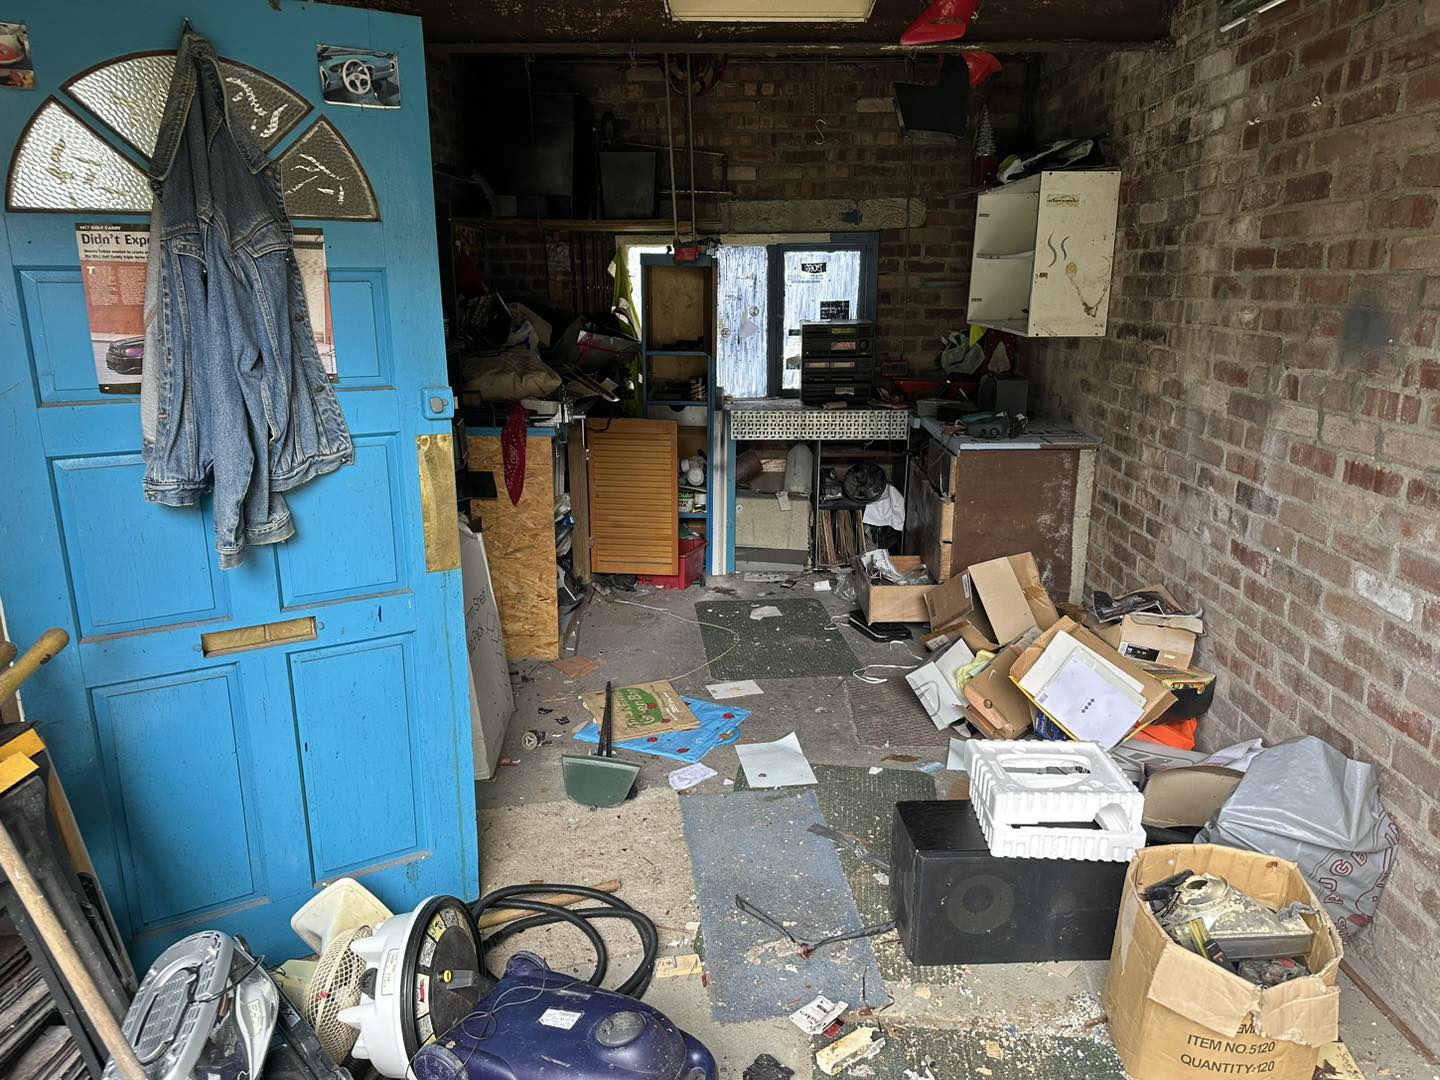 A photo of a garage full of junk